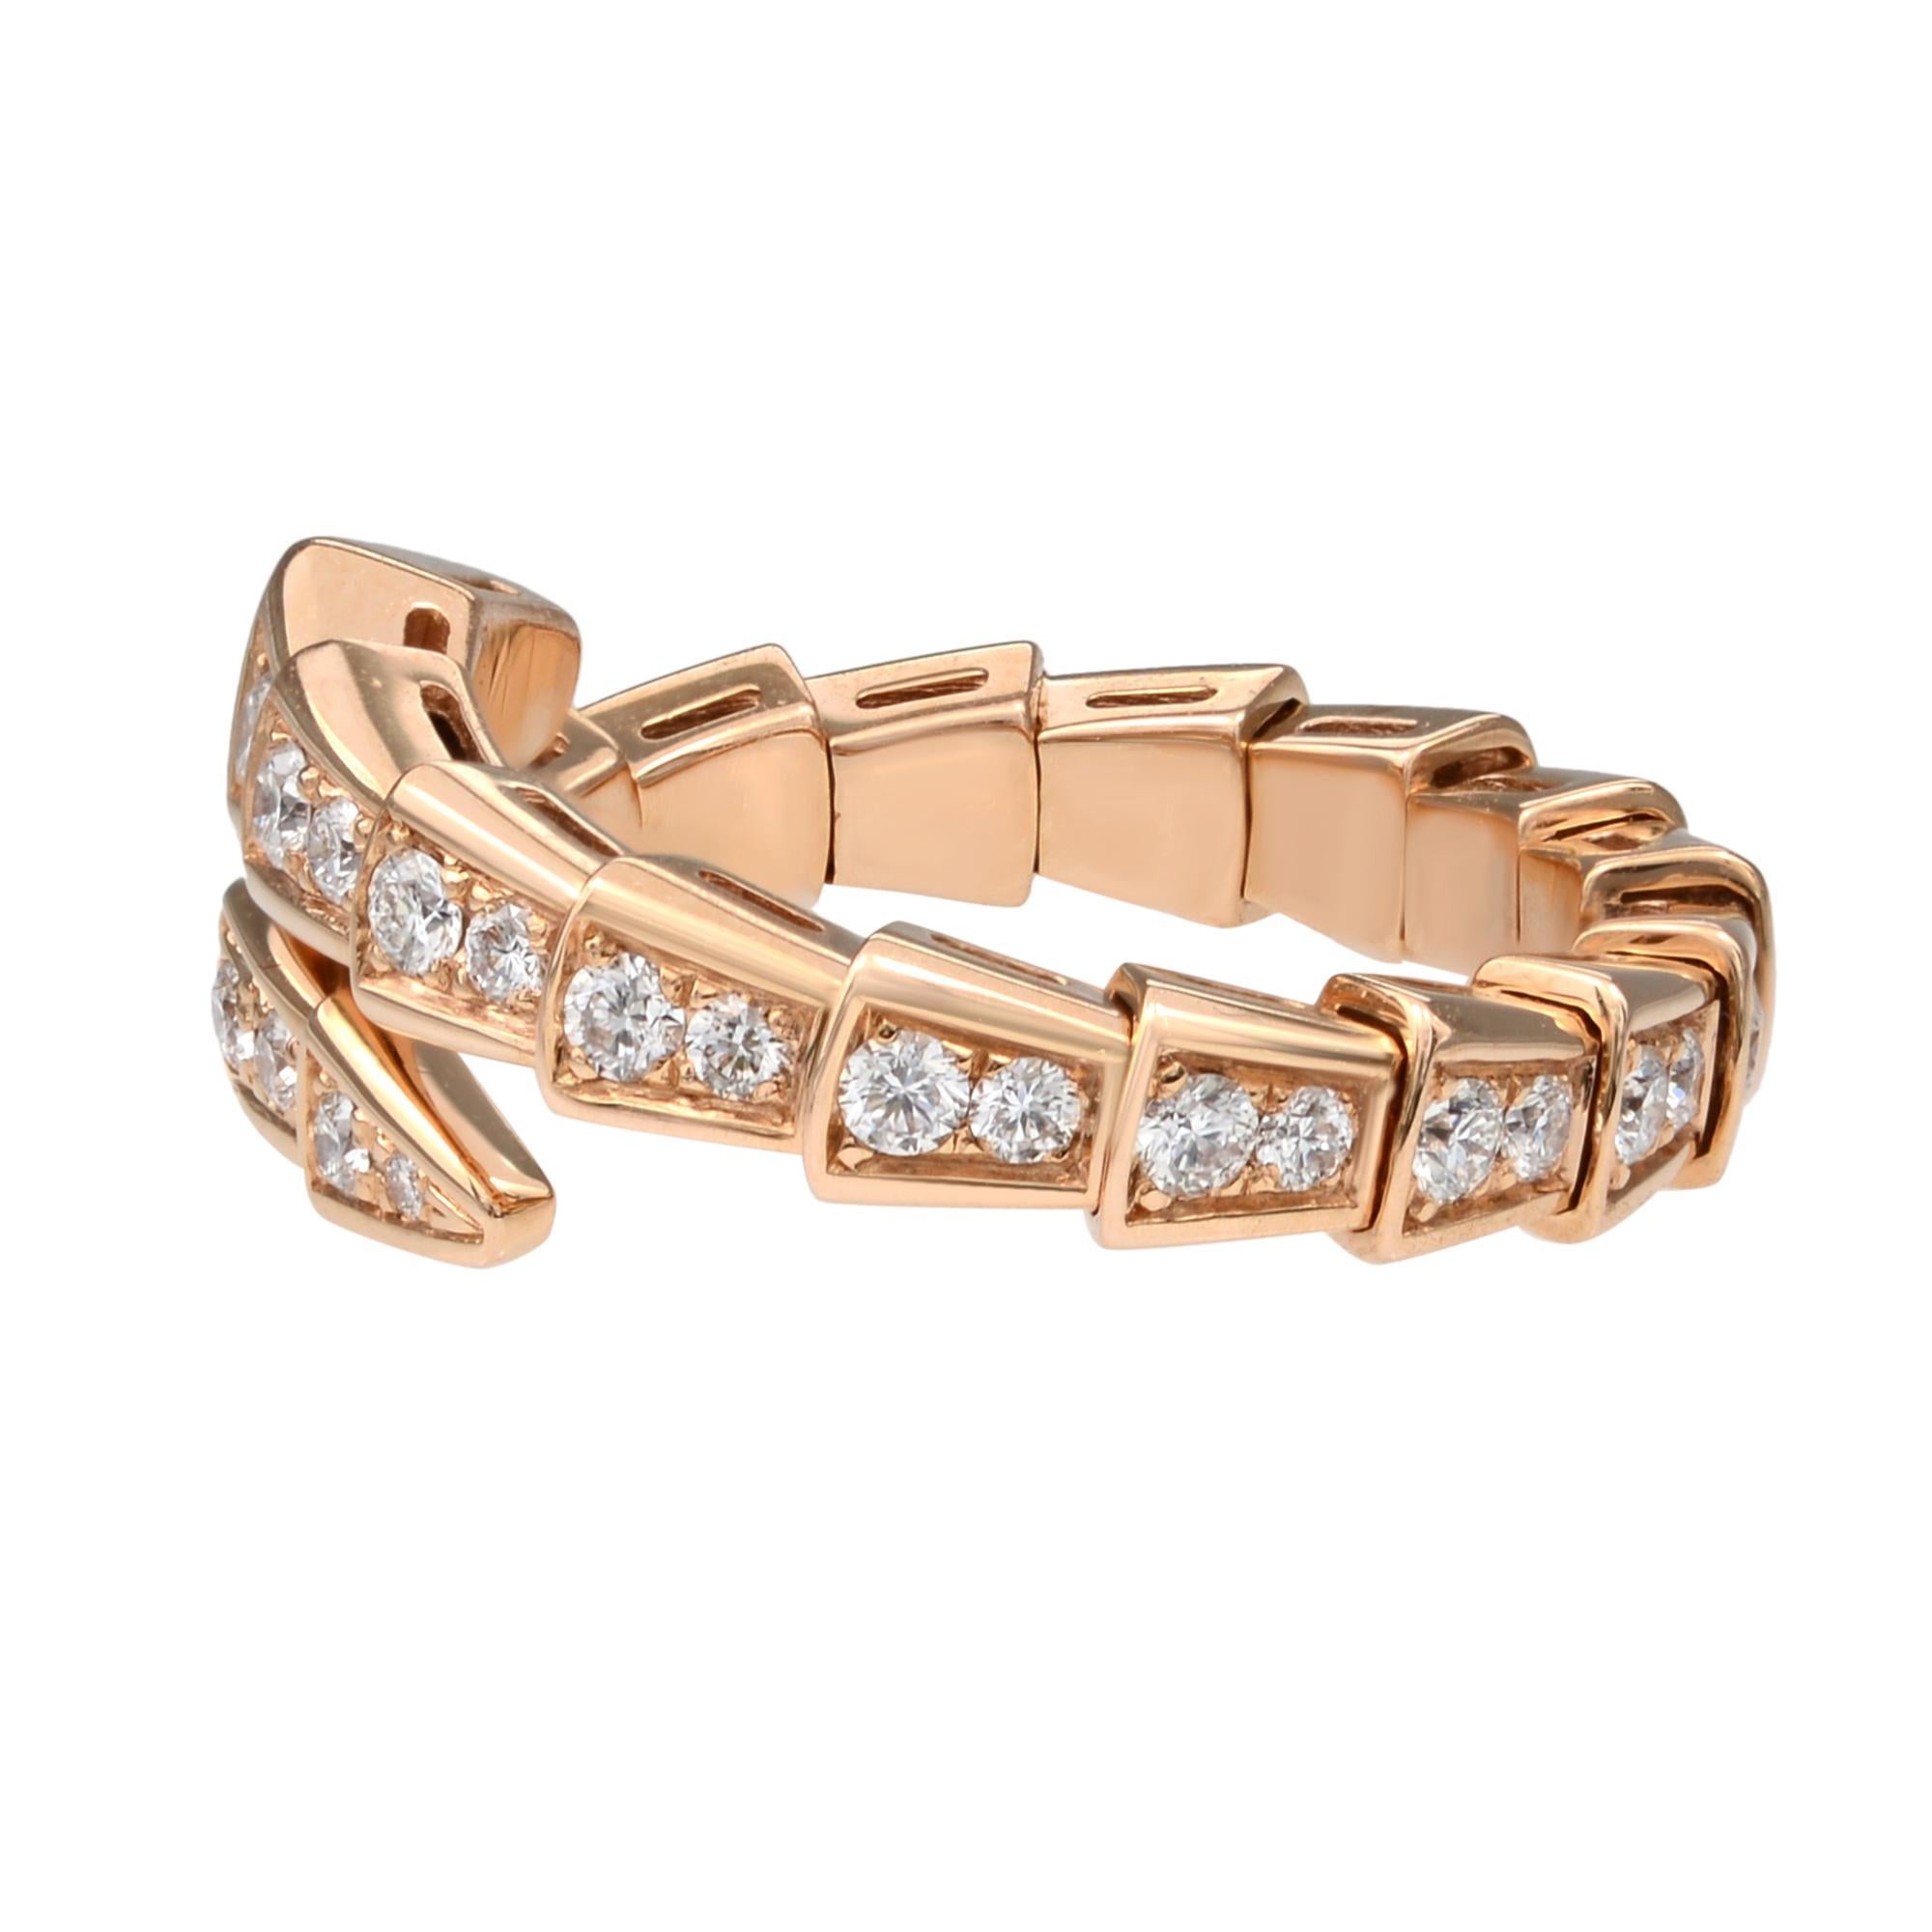 Bvlgari Serpenti Viper Round Cut Diamond Ring. This beautiful jewelry piece coils around the finger and stands out thanks to the precious beauty of the scales and the distinctive sinuosity of the snake. The ring is crafted in 18K rose gold and set